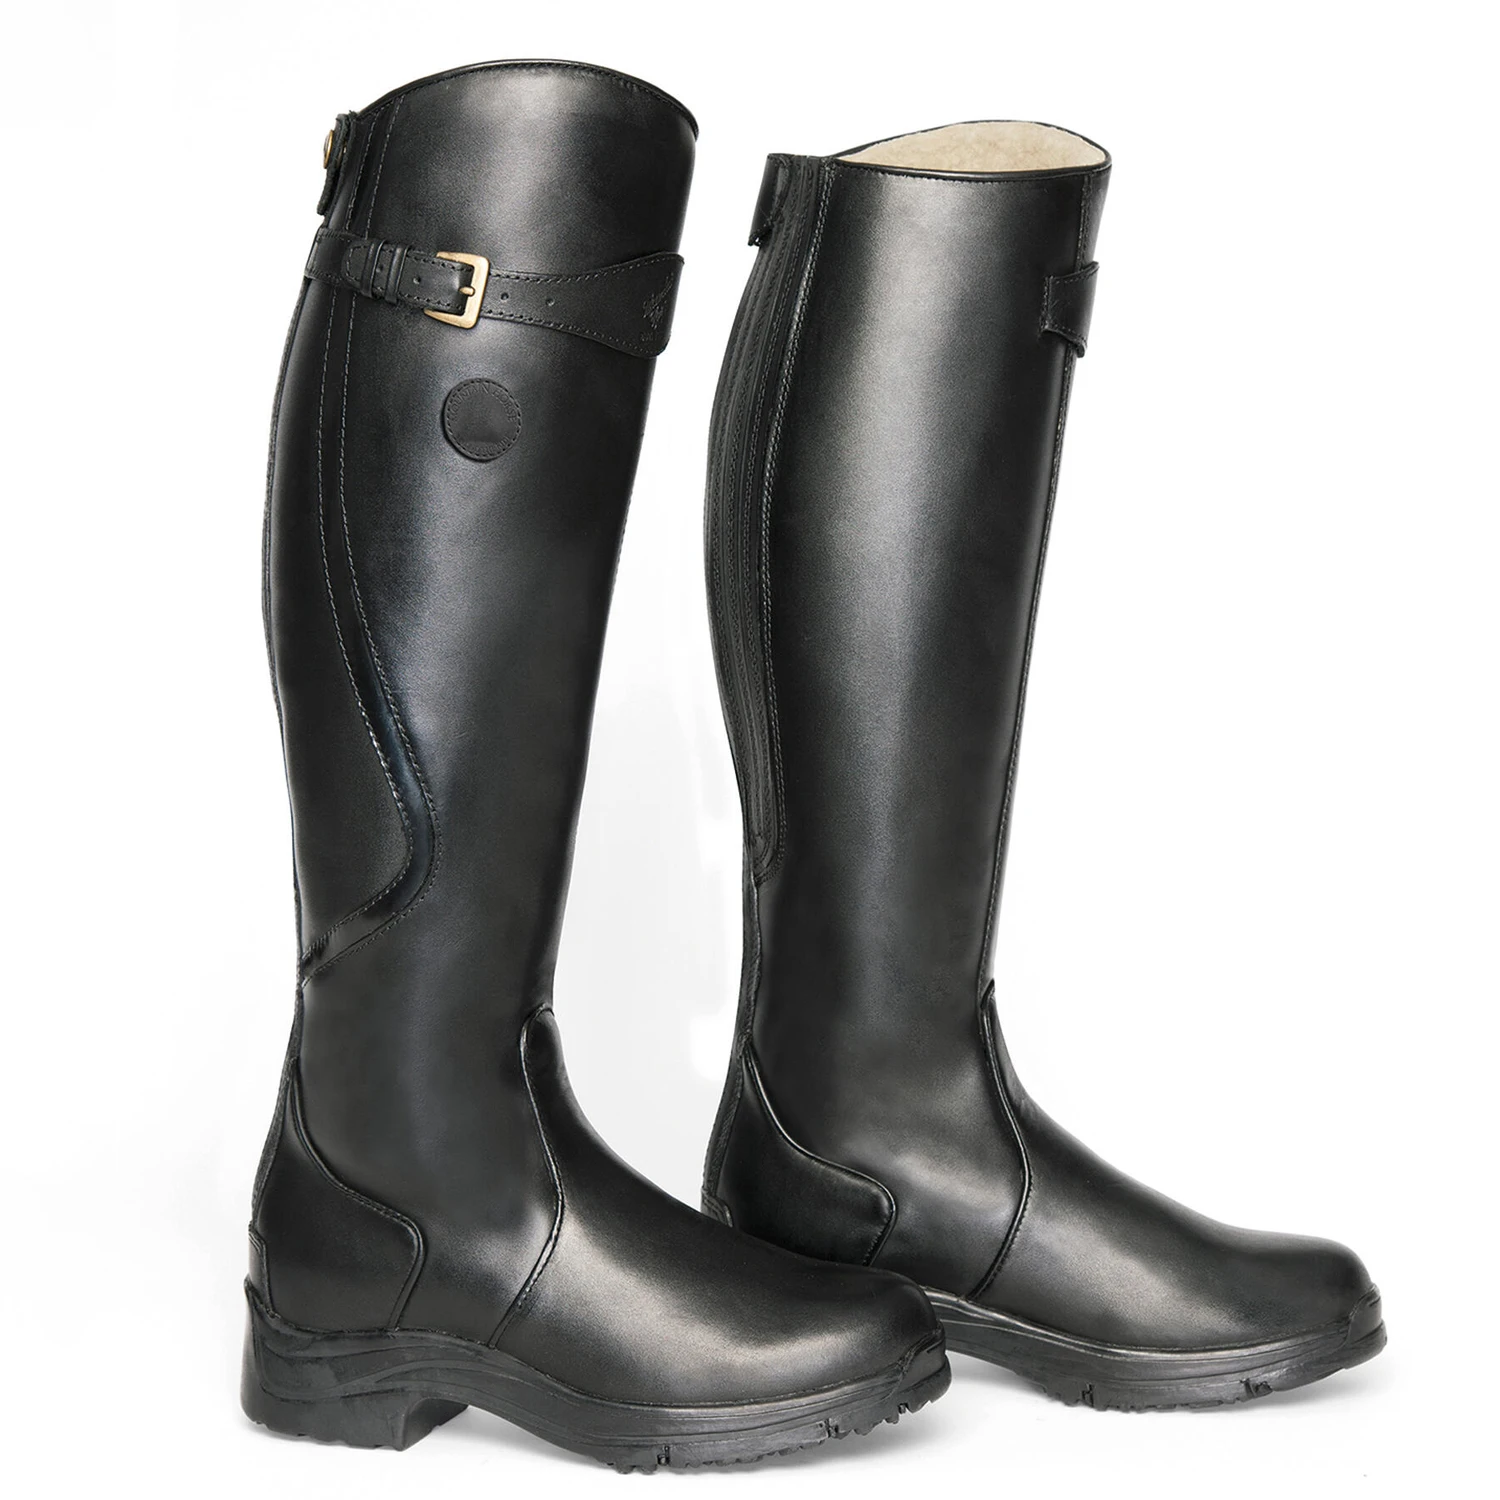 Equestrian Horse Riding Boots,Made Of Genuine Leather,Different Size ...